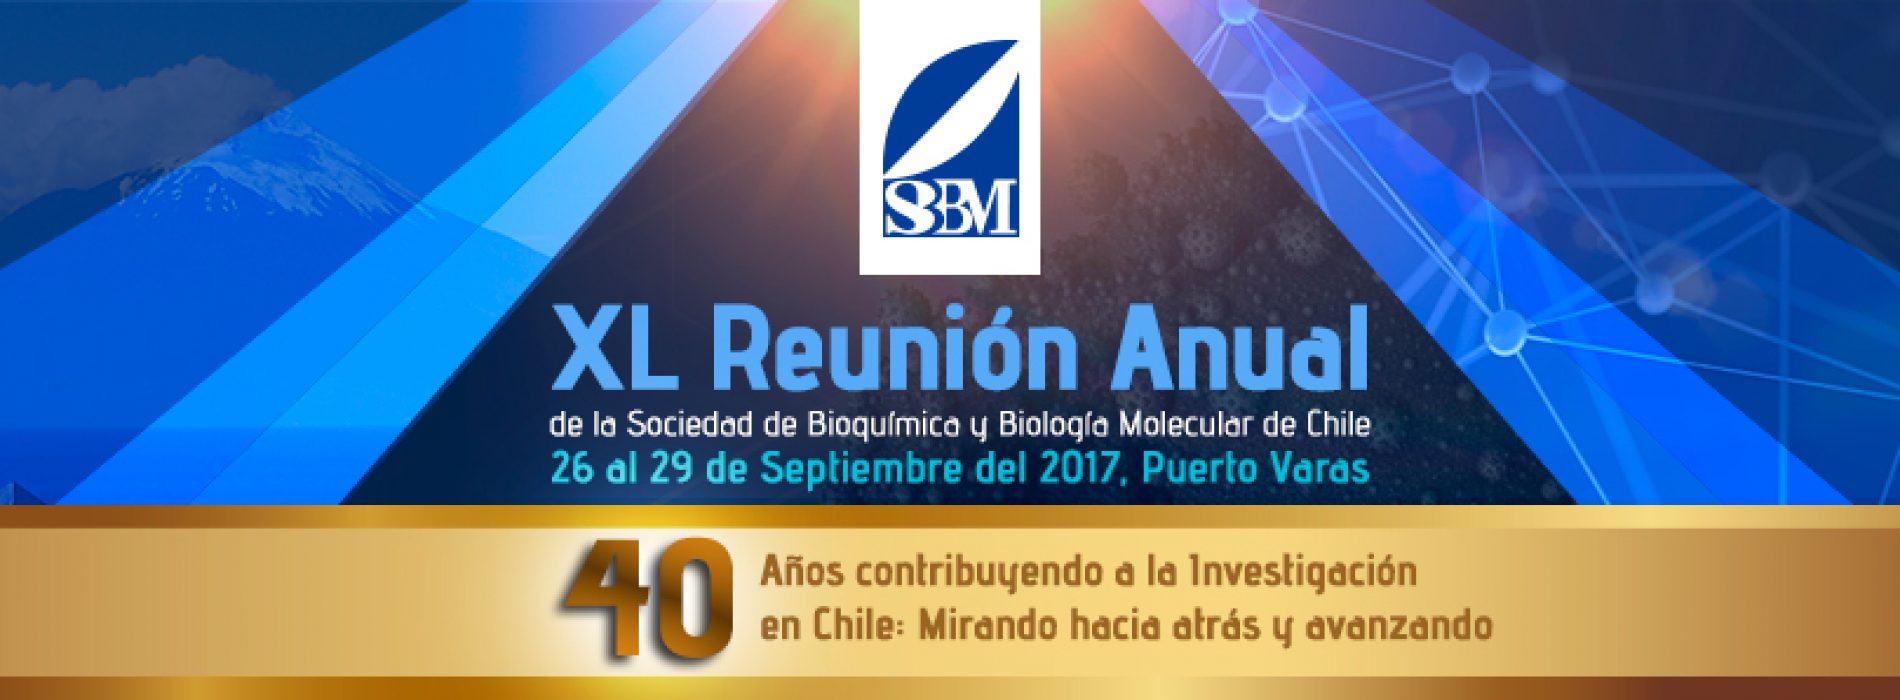 Video highlights of XL annual meeting of society for Biochemistry and Molecular Biology of Chile